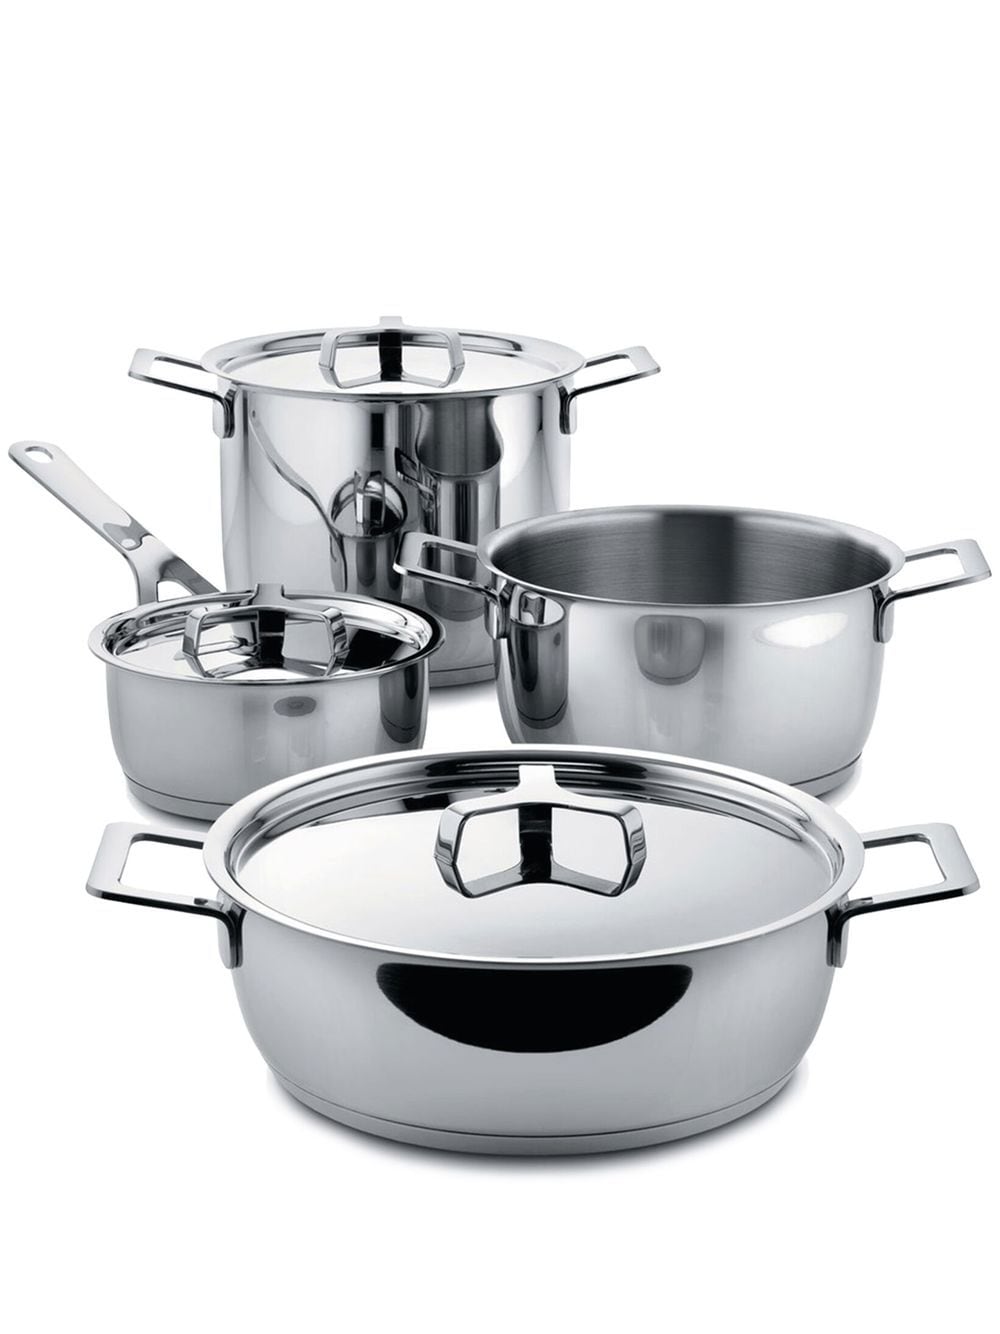 Alessi Pots & Pans Seven-piece Cookware Set In Silber